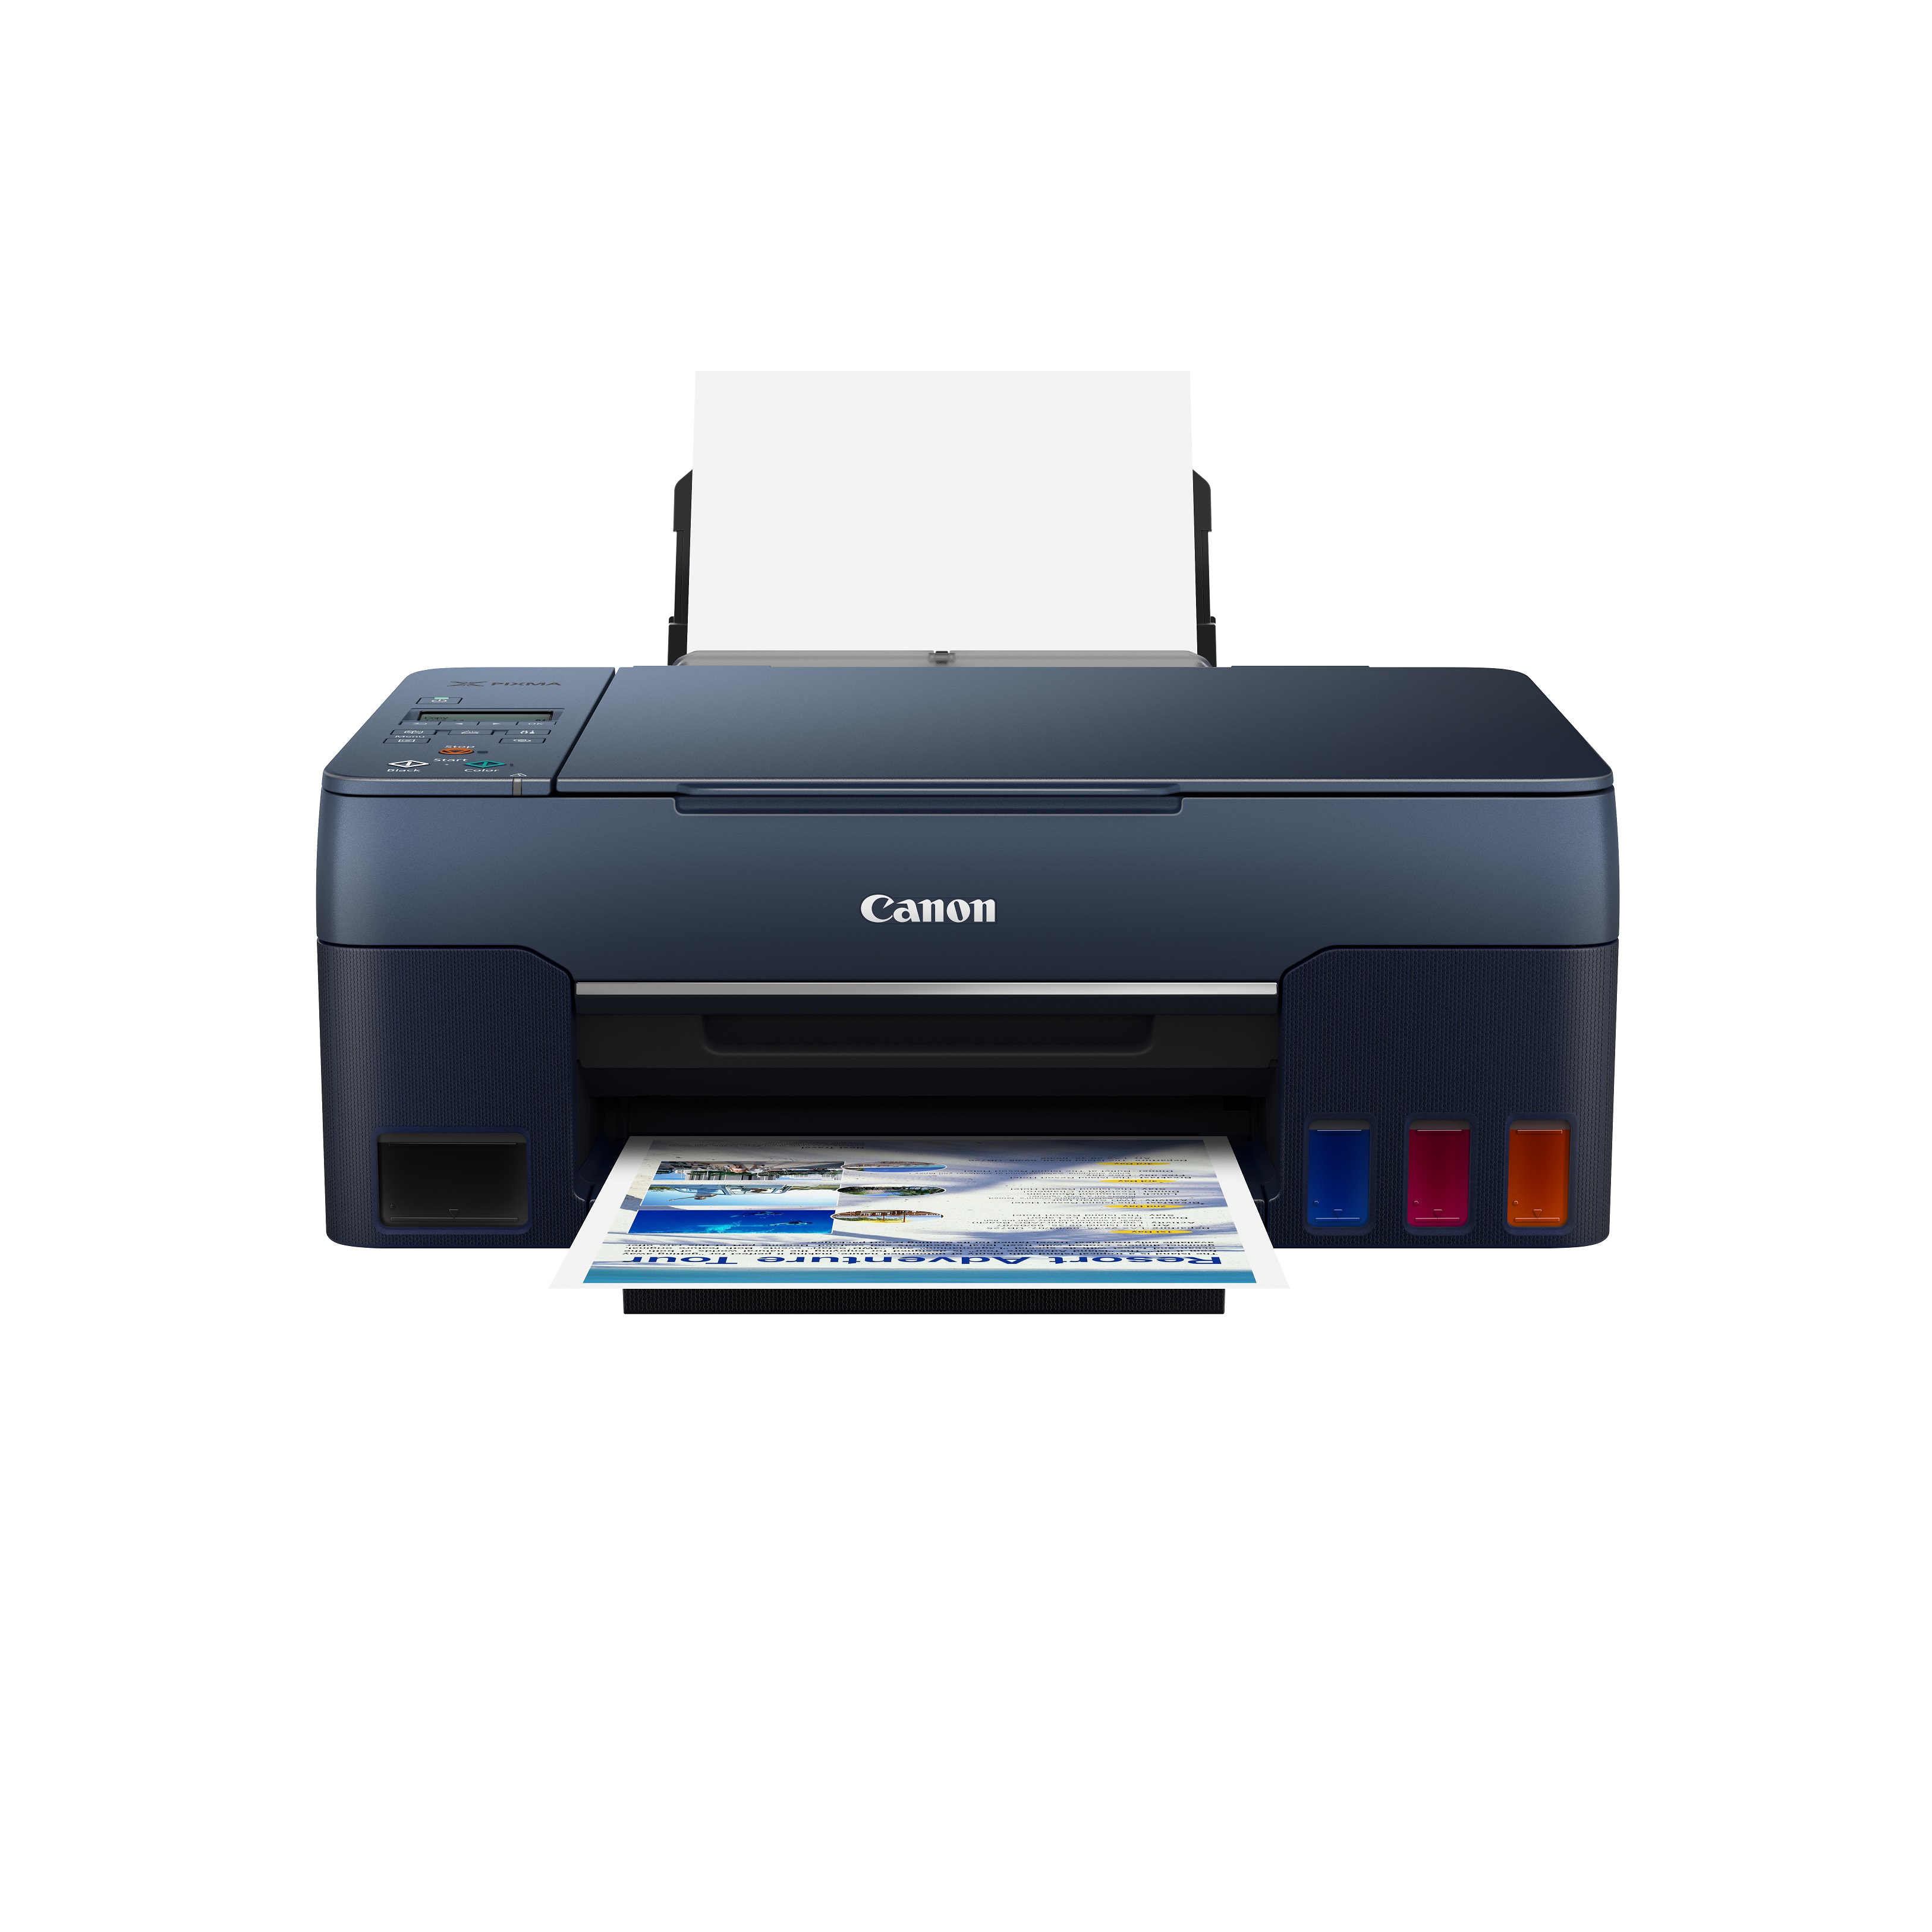 Canon unveils new PIXMA G series Ink tank printers to boost productivity for home and small businesses